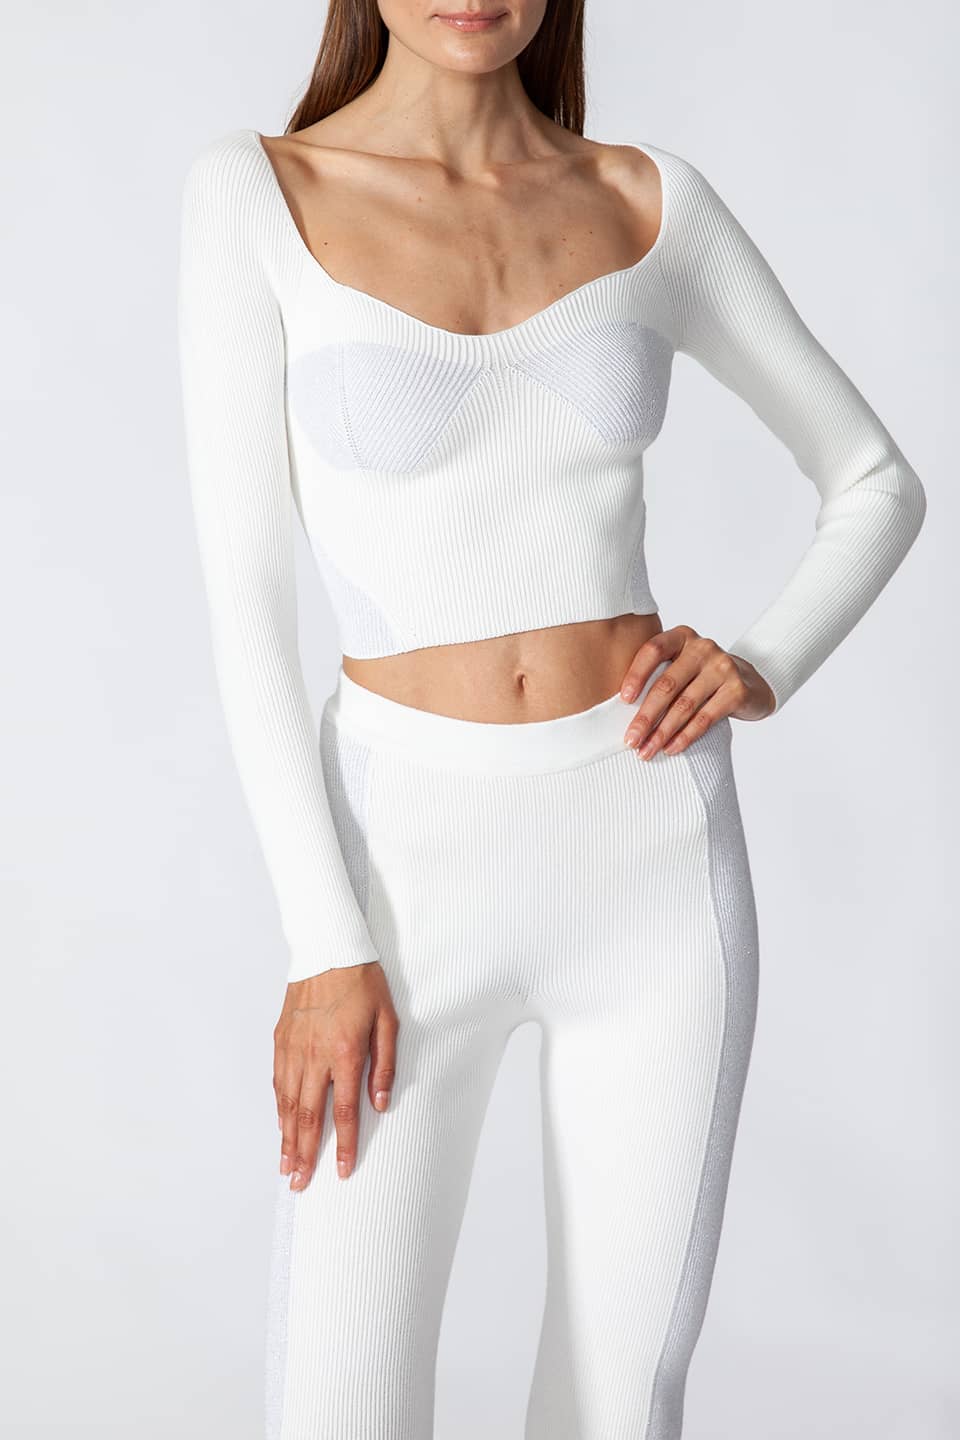 Model in a natural pose while wearing fashion artist Kukhareva London's trendy white top, with cut out neckline and inserts threaded with metallic, shimmering yarn.